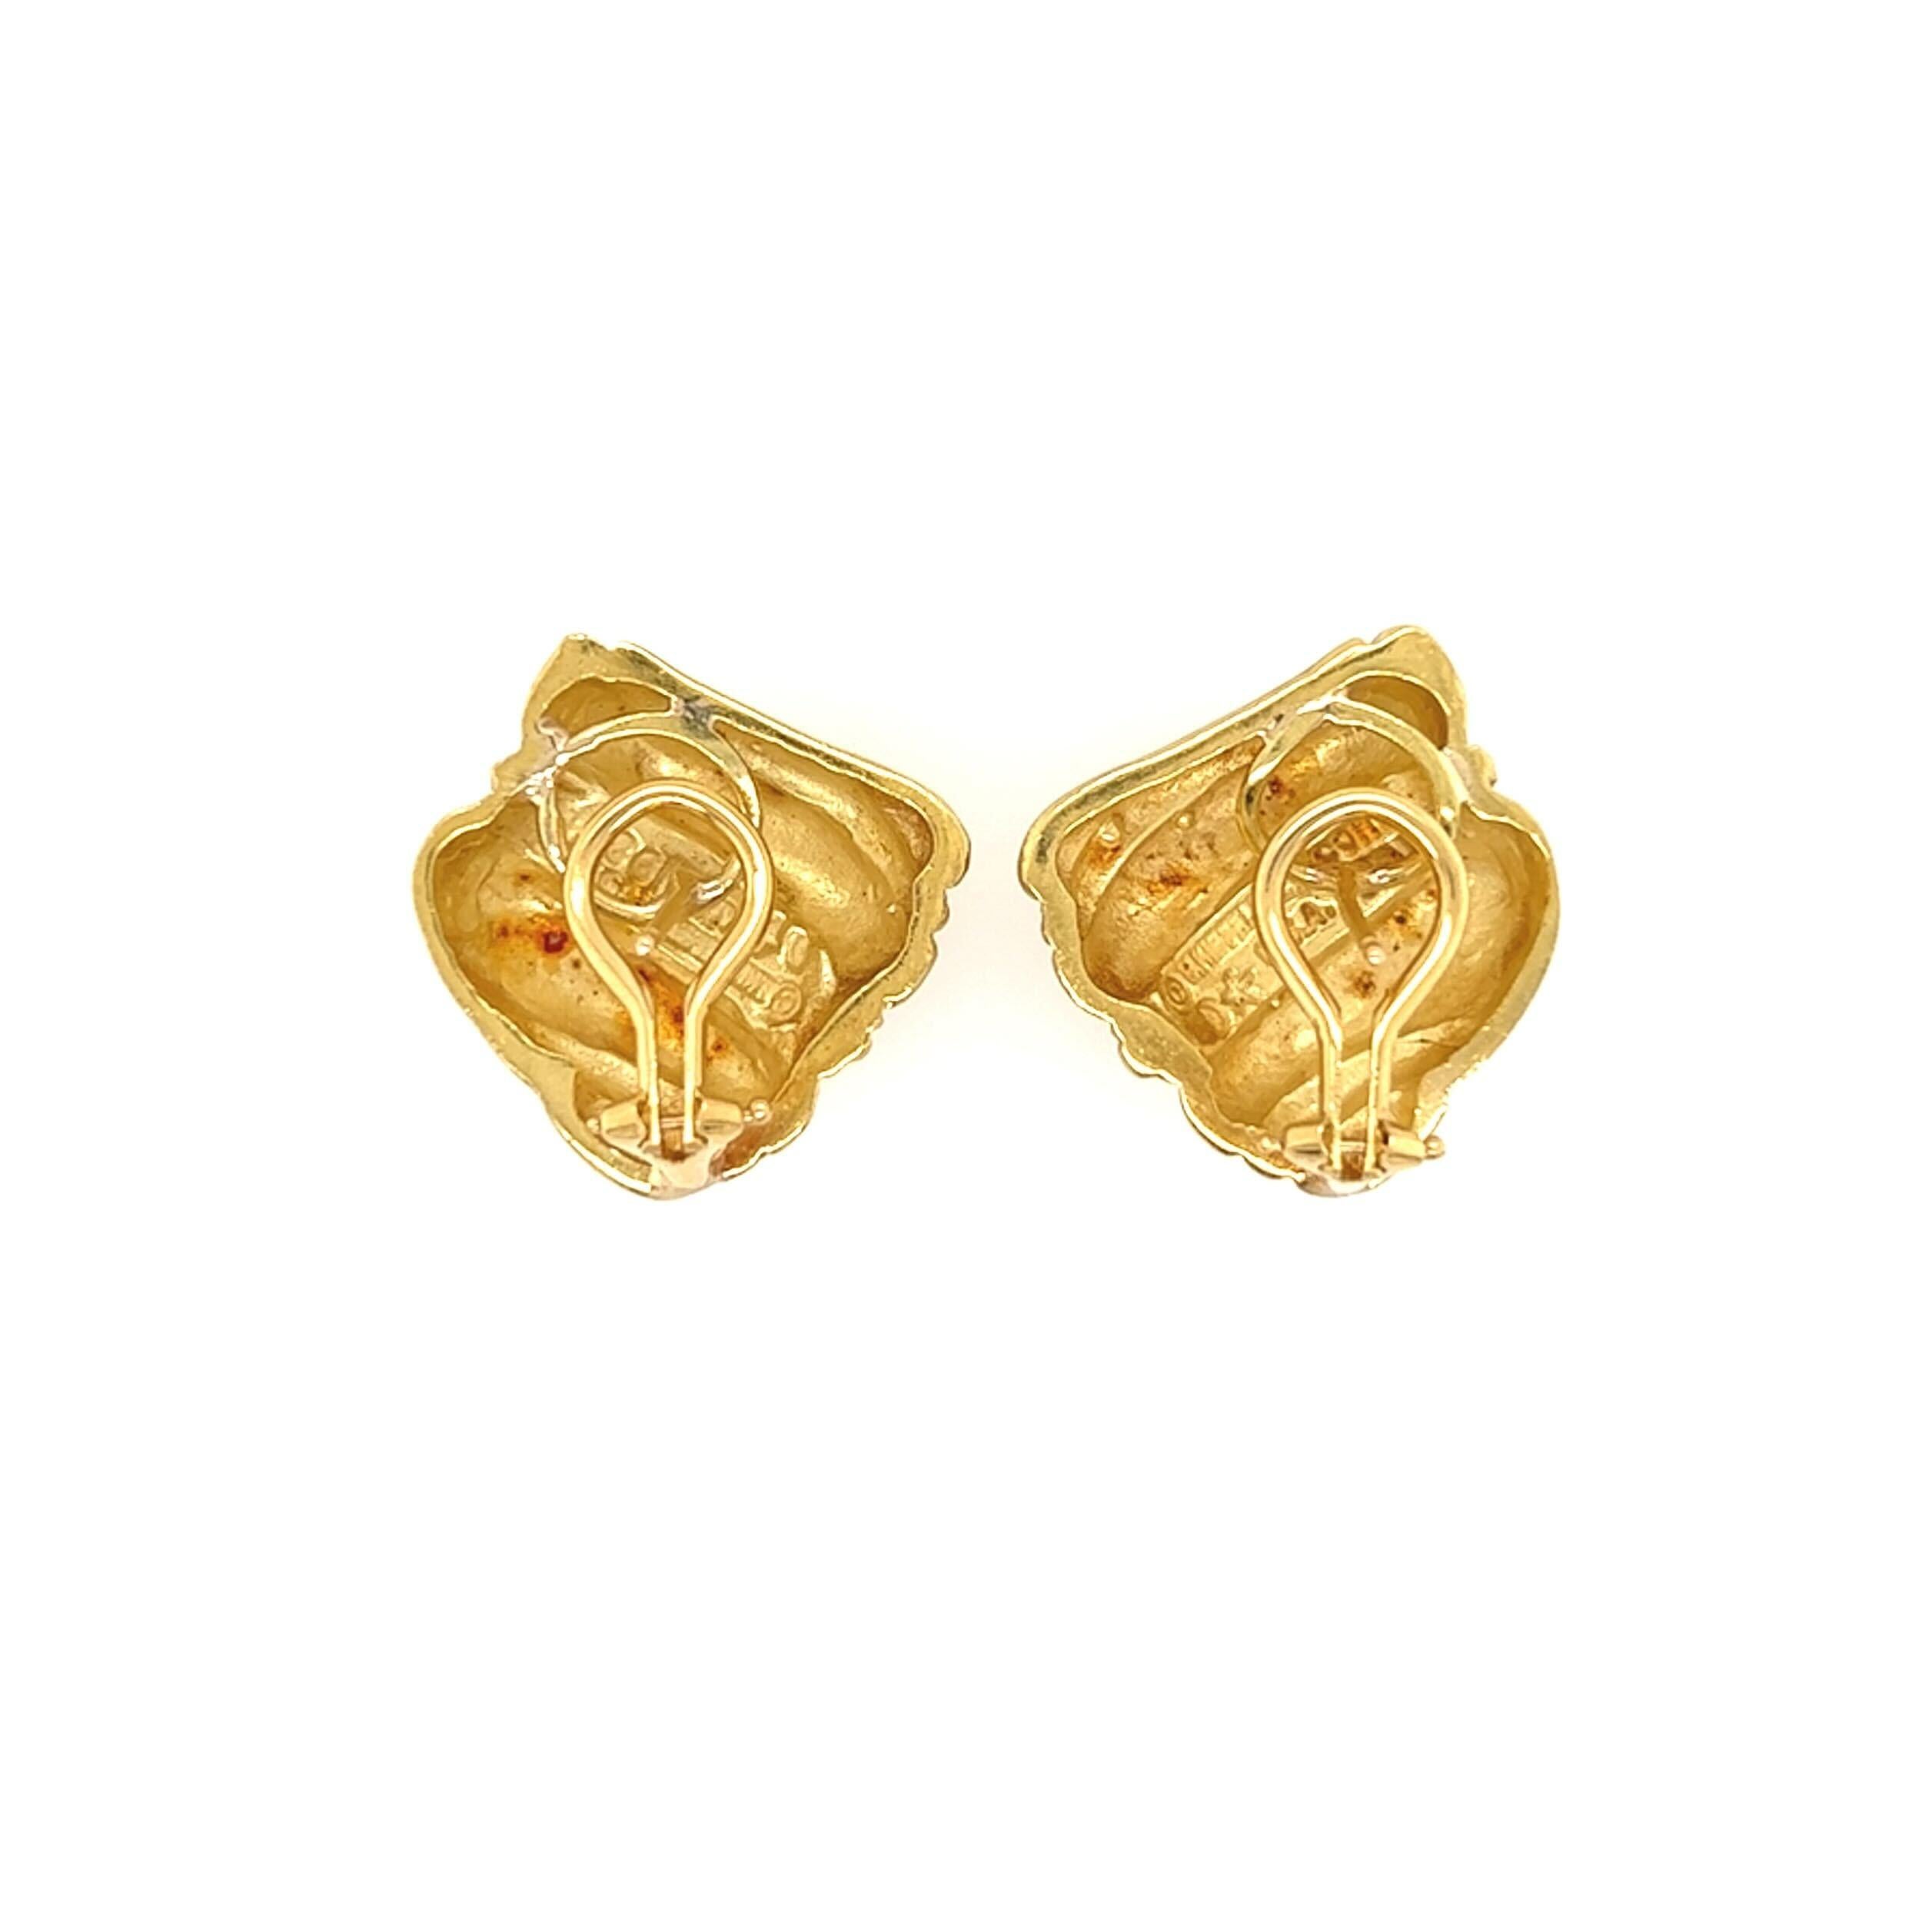 A pair of 18 karat green gold earrings, Barry Kieselstein-Cord.  The “Caviar” earrings designed as swirls centering a row of gold beadwork.  Width approximately 7/8 inch.  Gross weight approximately 17.70 grams.  Signed Kieselstein Cord.